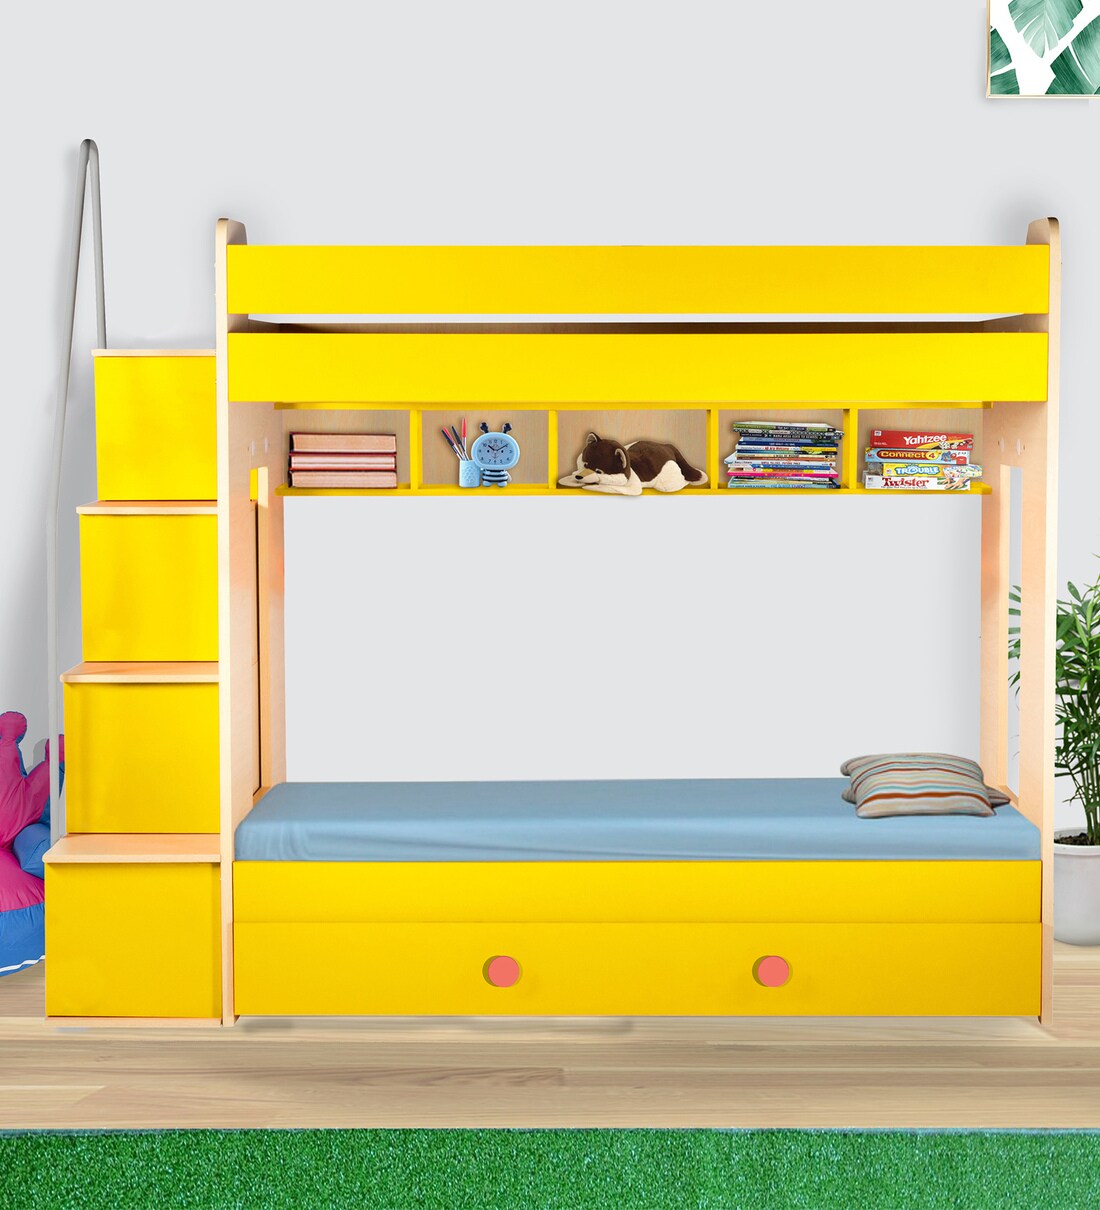 Buy Multi Flexi Bunk Bed In Yellow Colour With Drawer Storage At 10 Off By Yipi Online Pepperfry 4132